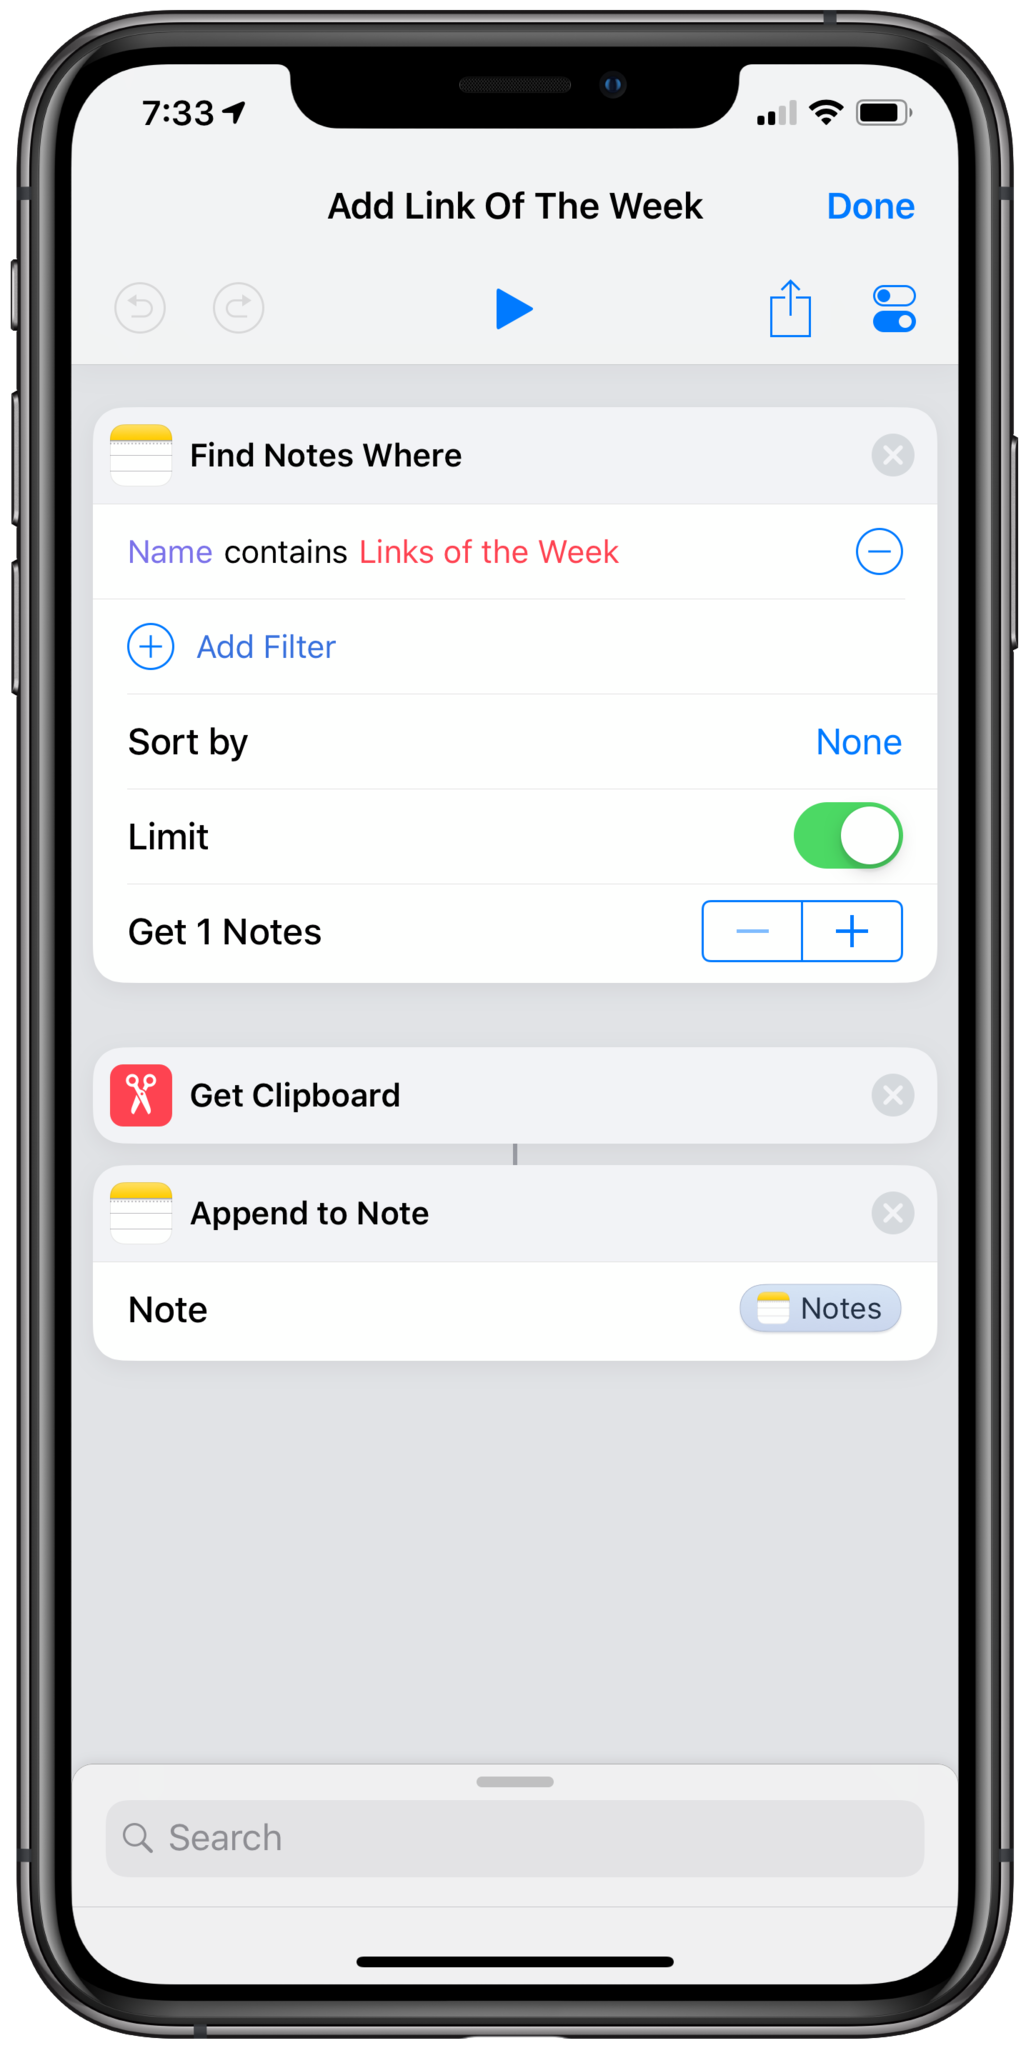 Add to a Links Of The Week shortcut by searching for the name and using Get Clipboard and Append to Note